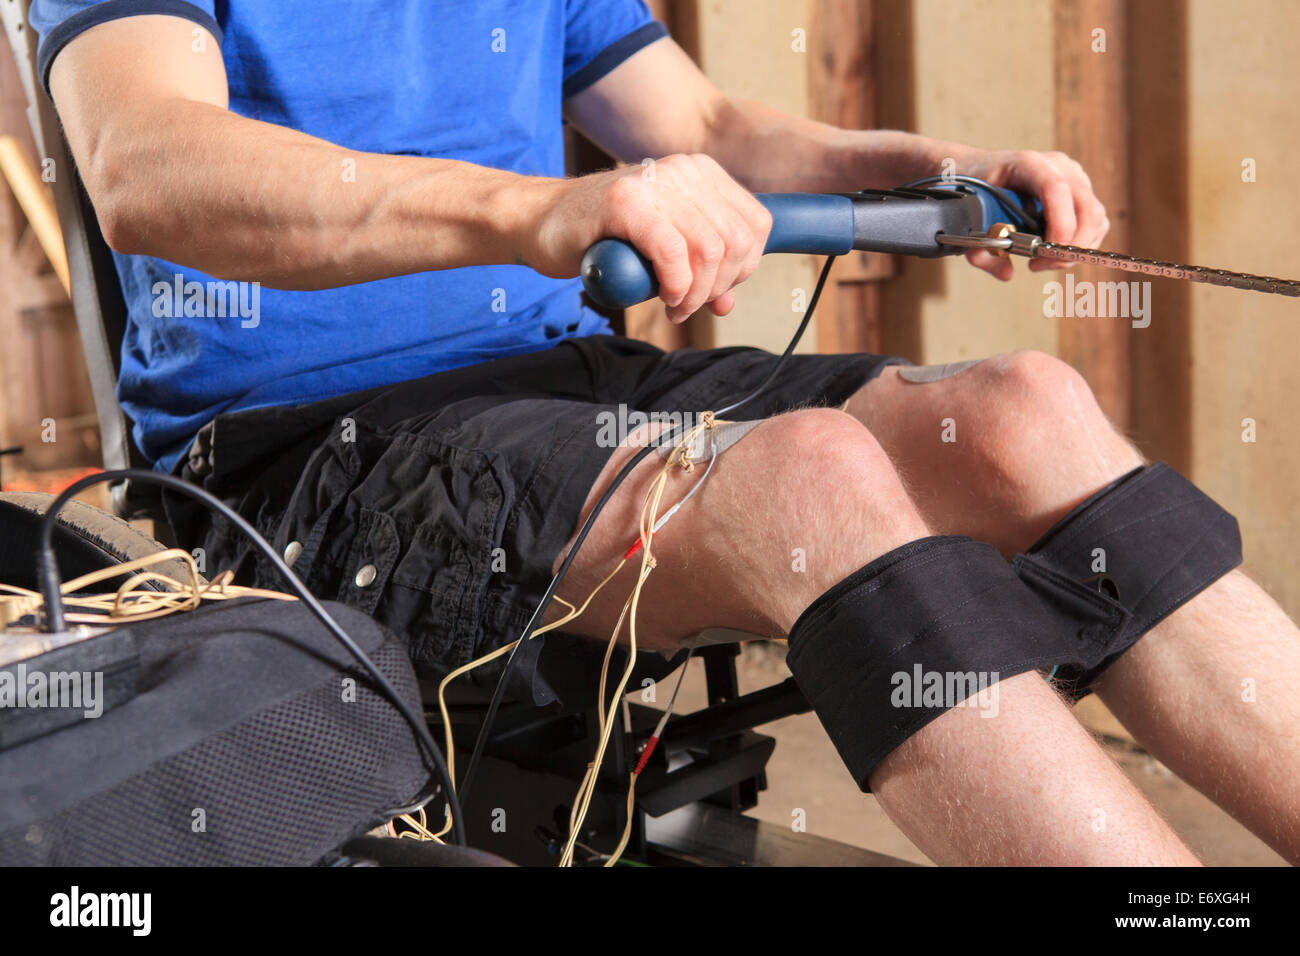 https://c8.alamy.com/comp/E6XG4H/man-with-spinal-cord-injury-using-his-rowing-machine-with-a-muscle-E6XG4H.jpg